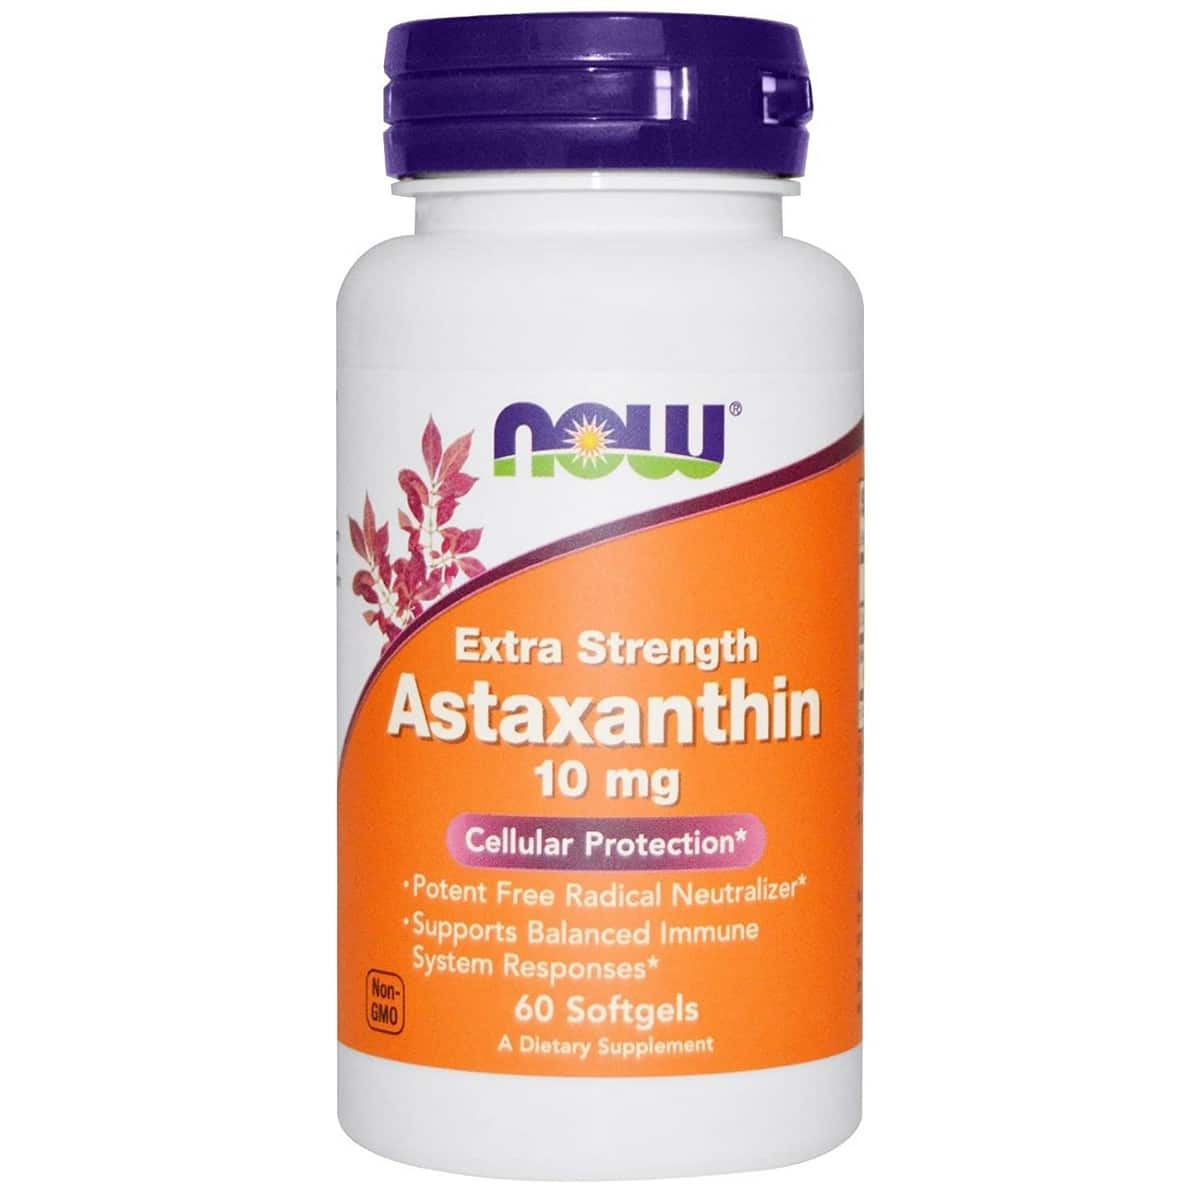 Astaxanthin for Hair Loss Does It Work  Careof